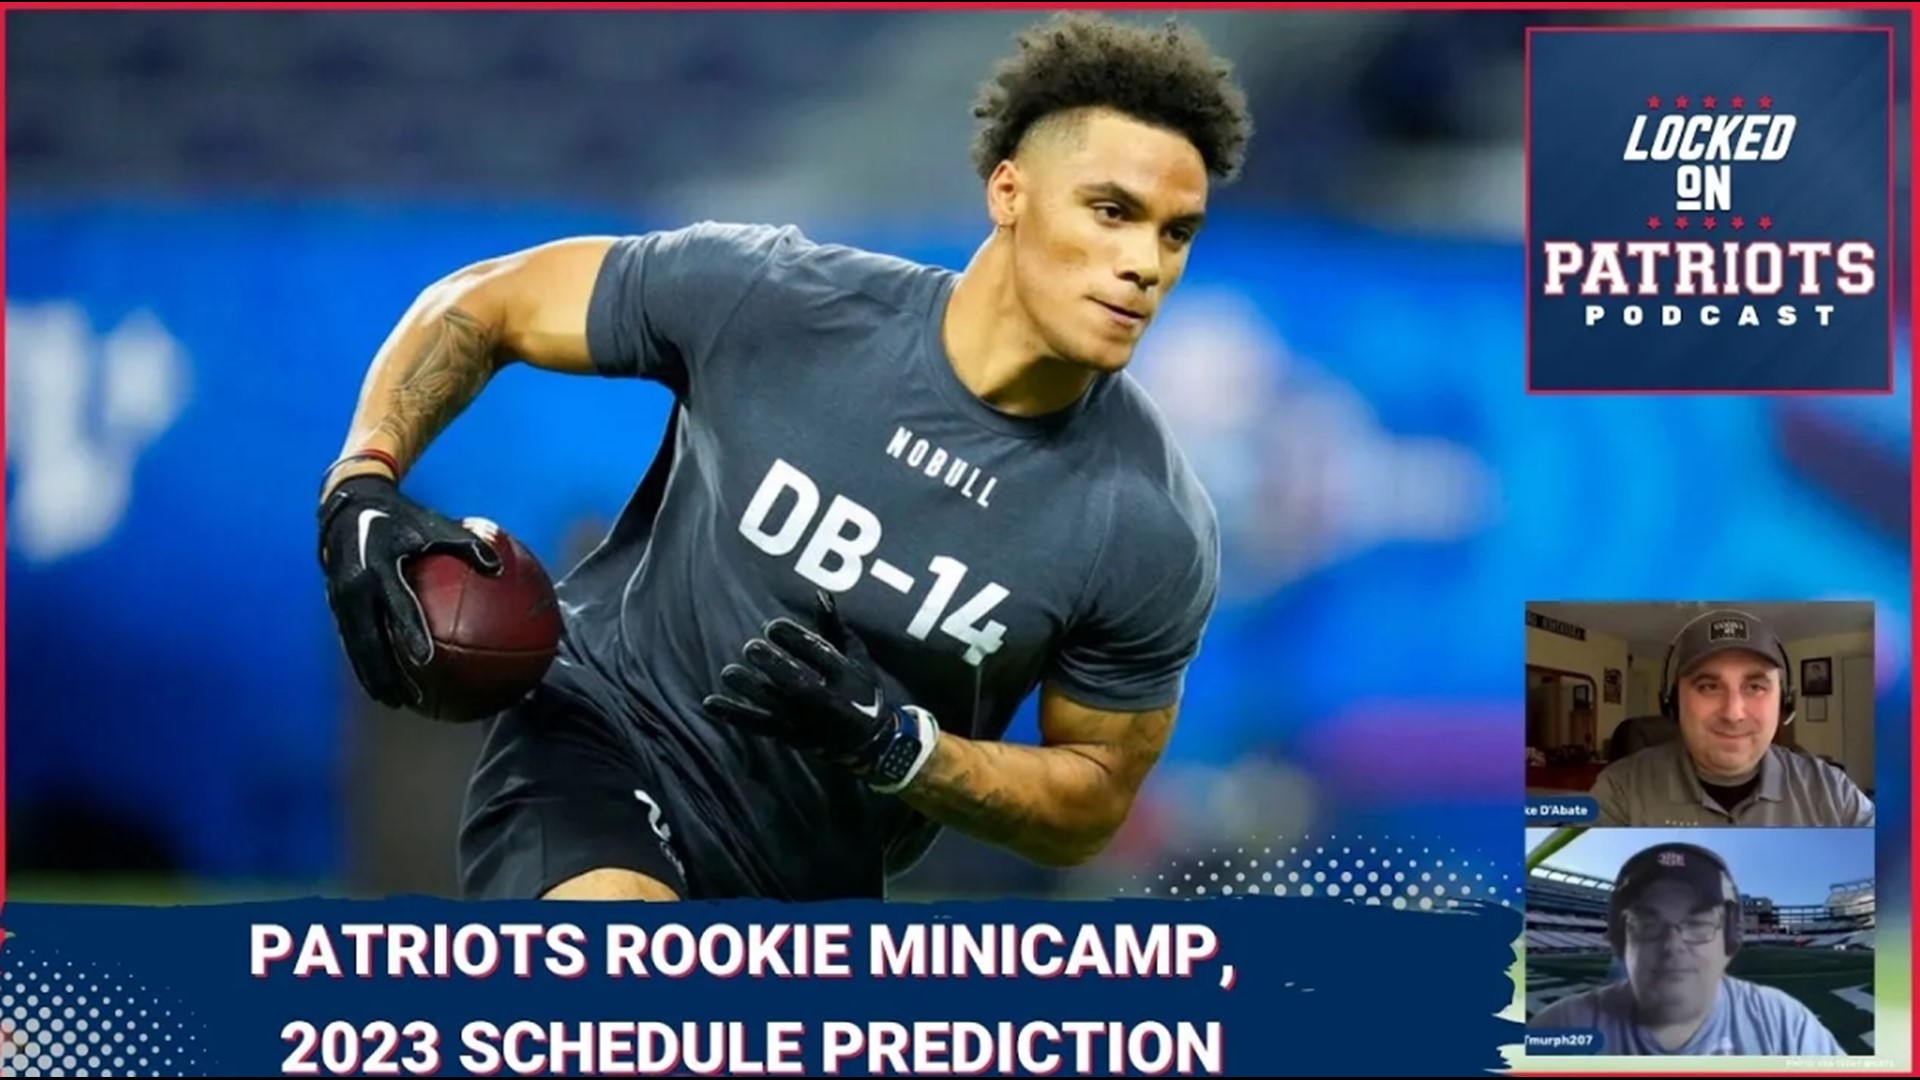 The New England Patriots got their first look at their 2023 rookie class over the weekend by hosting Rookie Minicamp at Gillette Stadium.